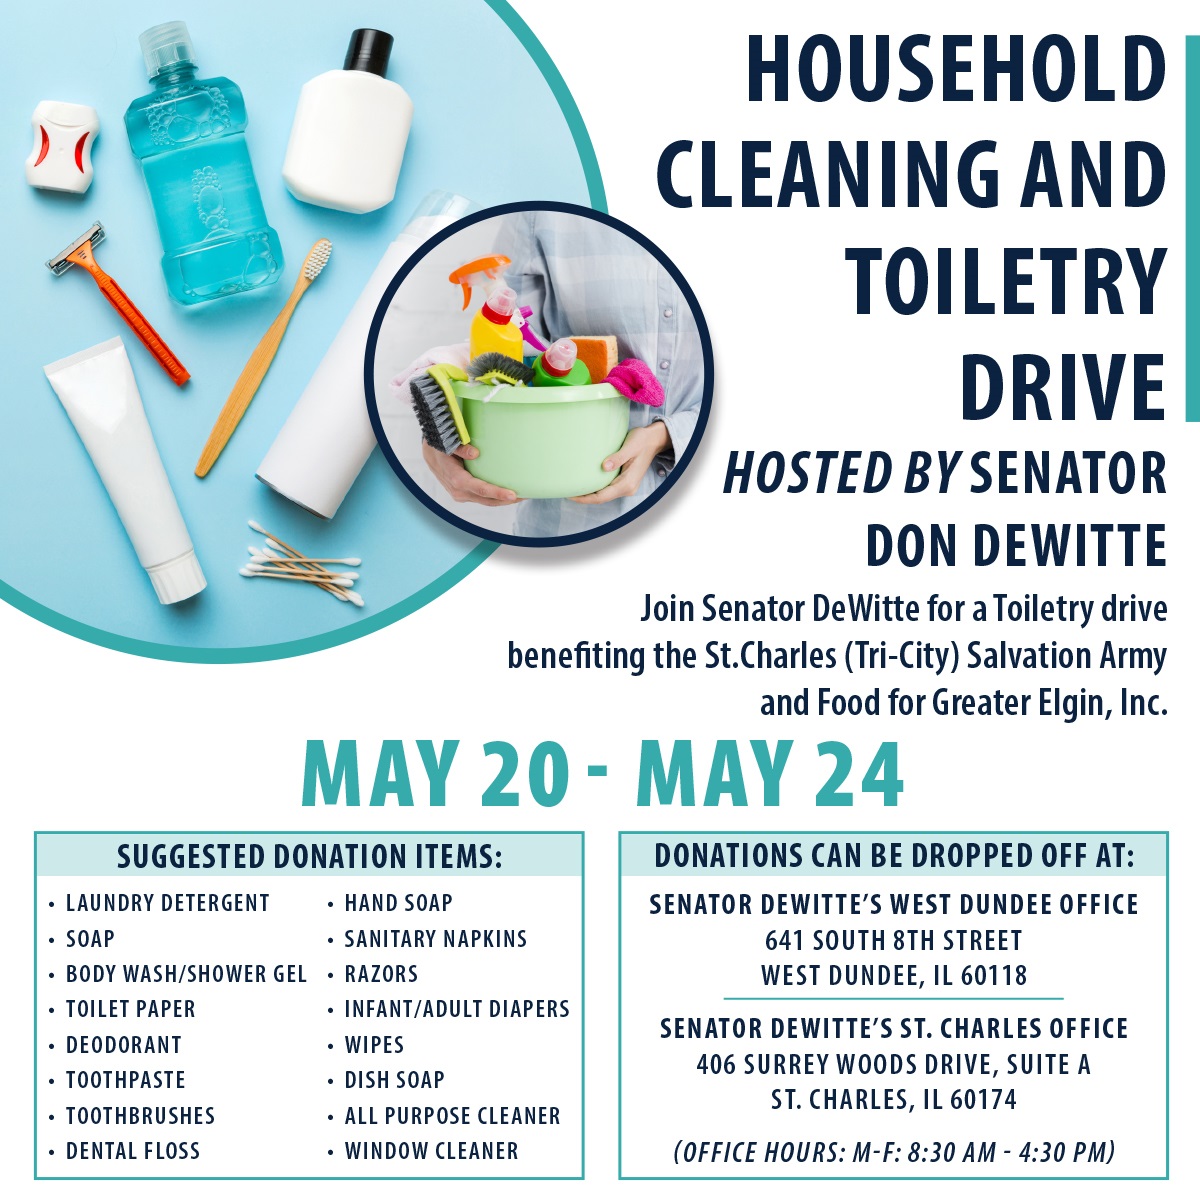 Cleaning Supply & Toiletry Drive